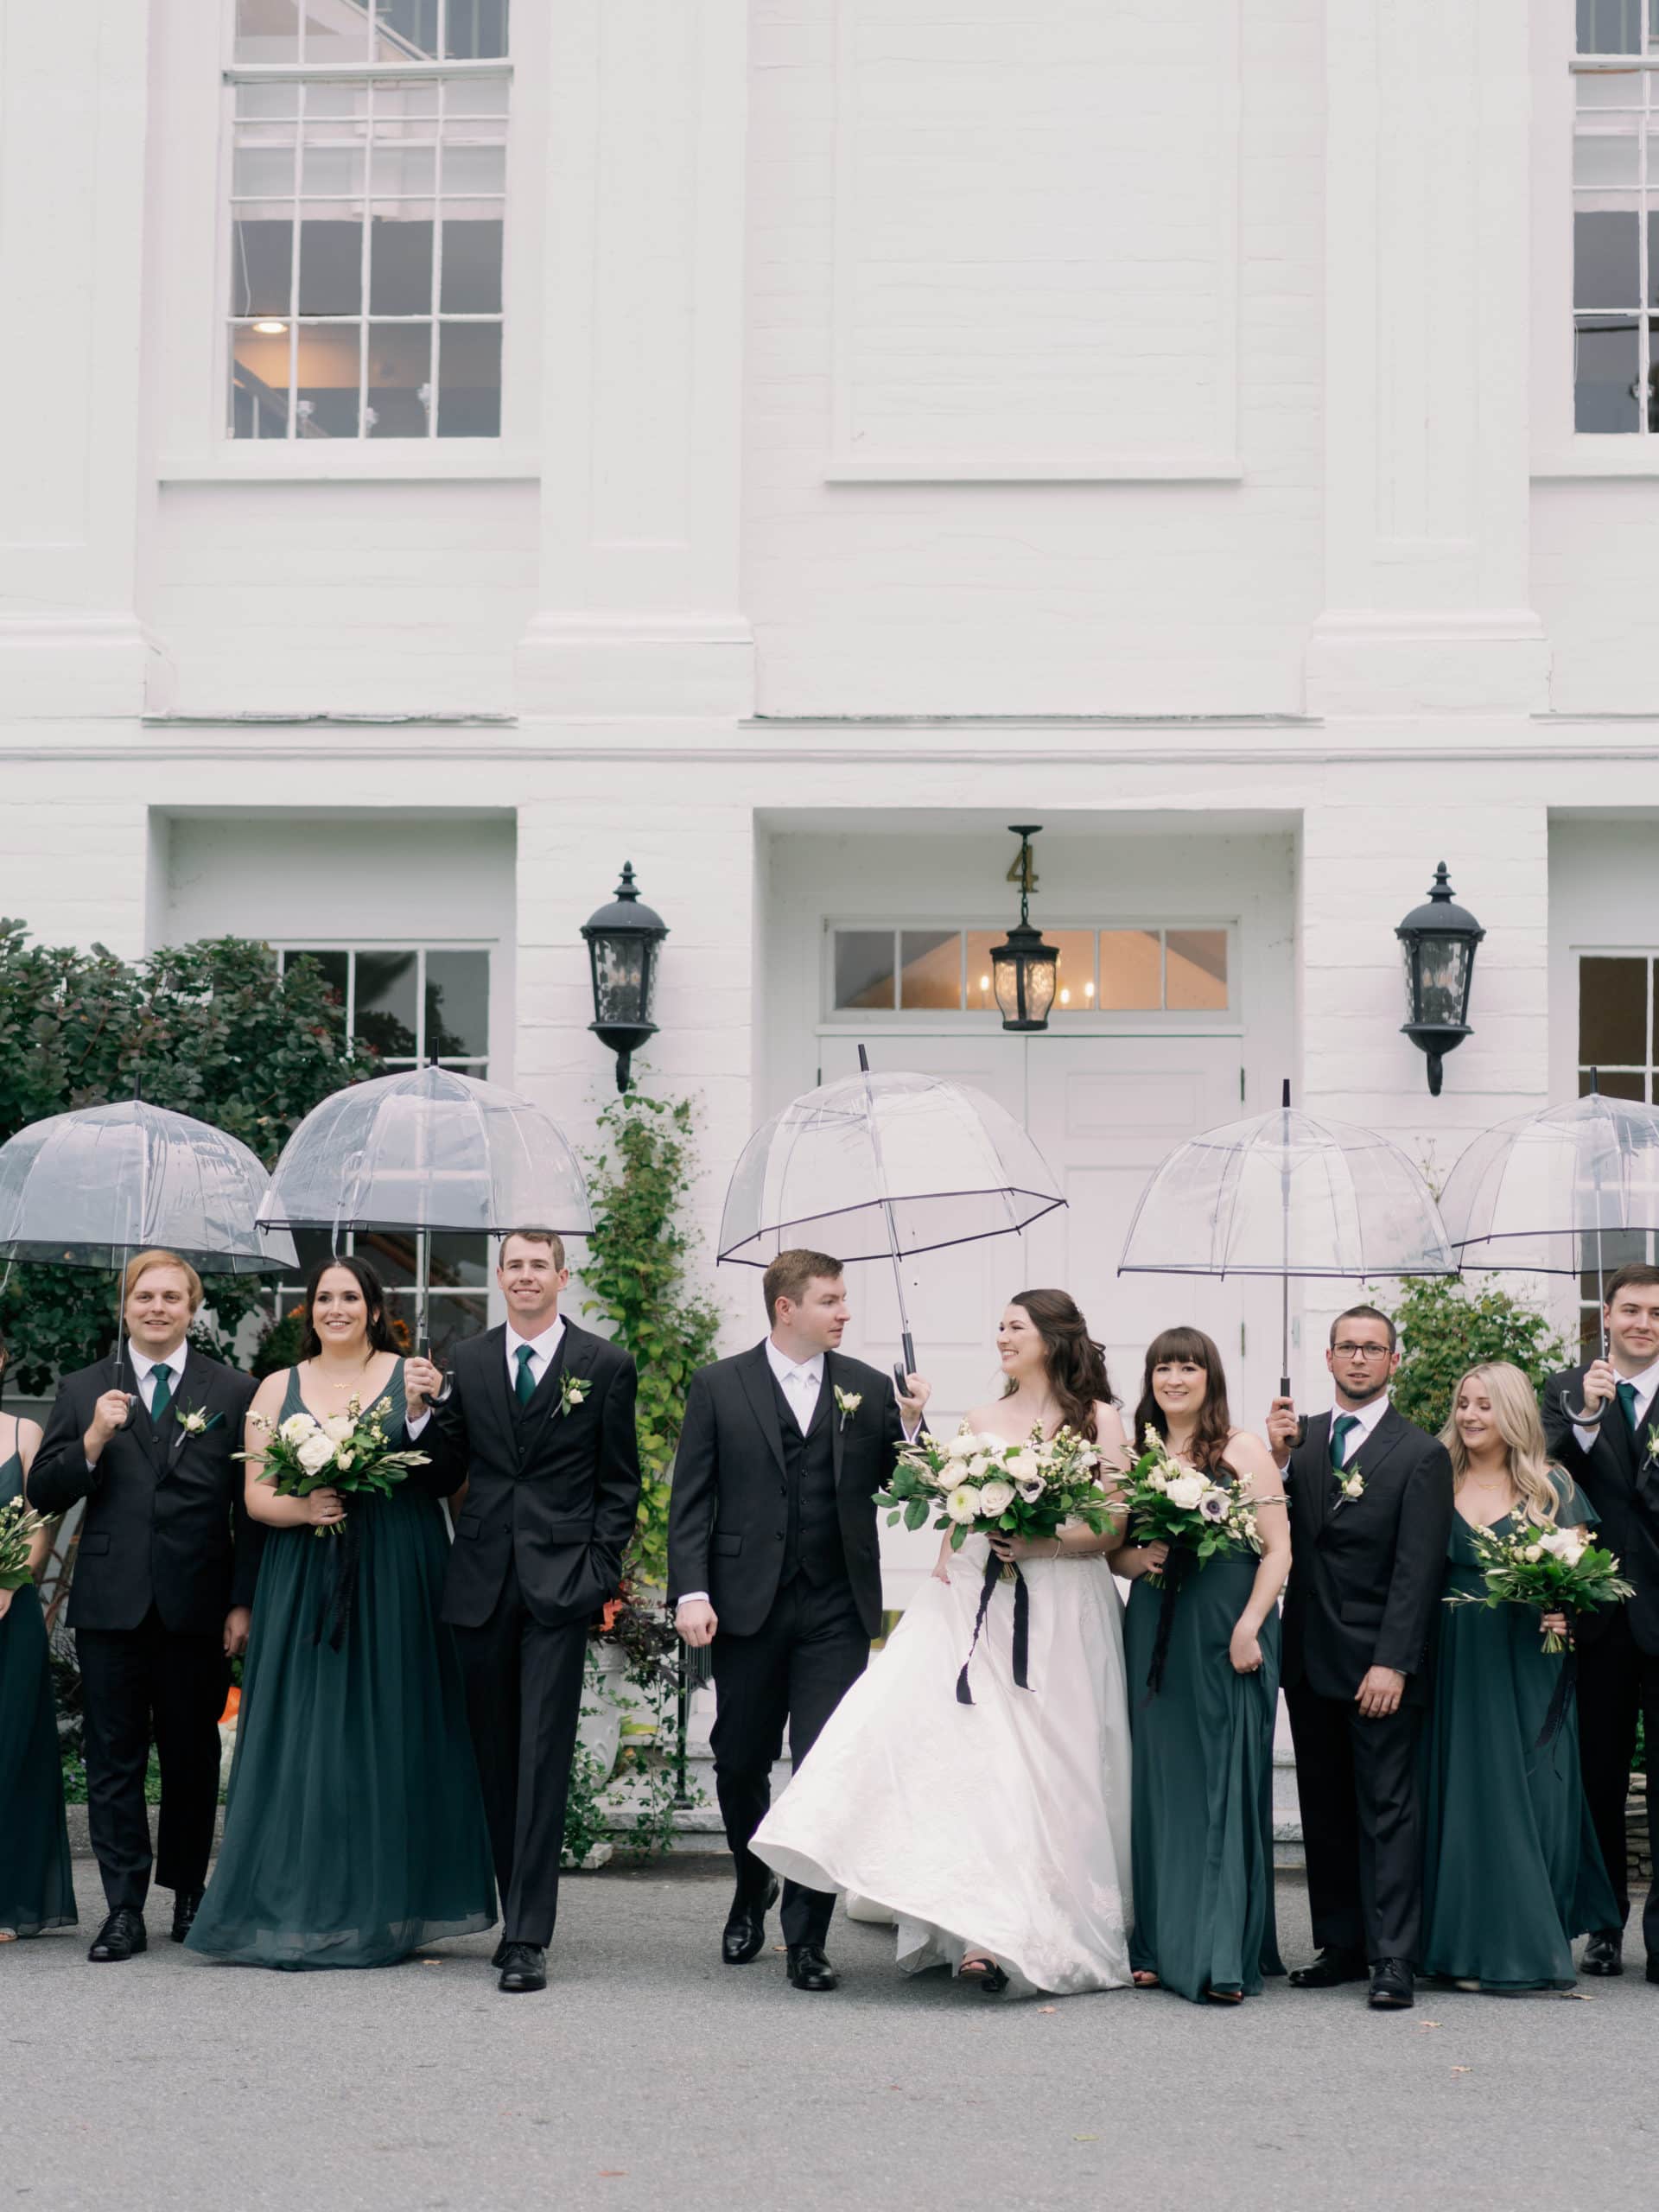 Bride and groom pose with their entourage beside them, with all of them standing in pairs and holding a clear umbrella, shot by Marcela Diaz Photography